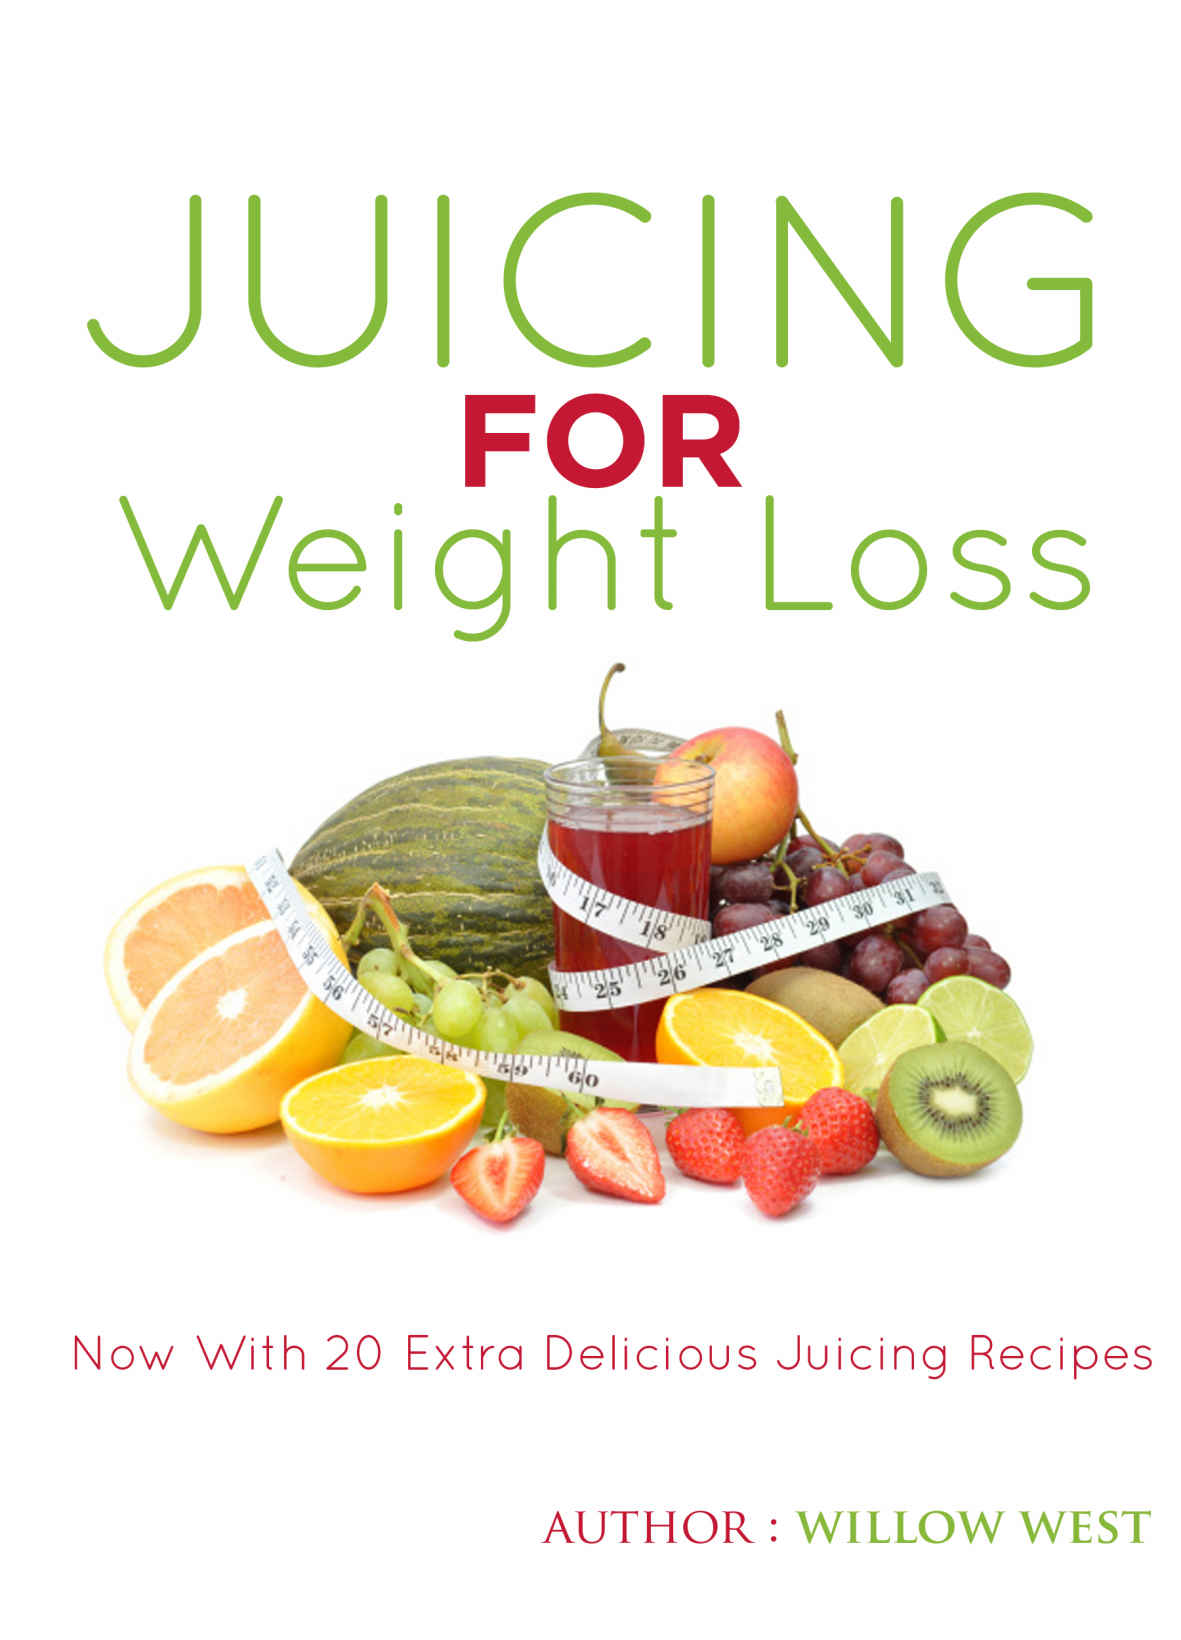 FREE: Juicing for beginners by Willow West